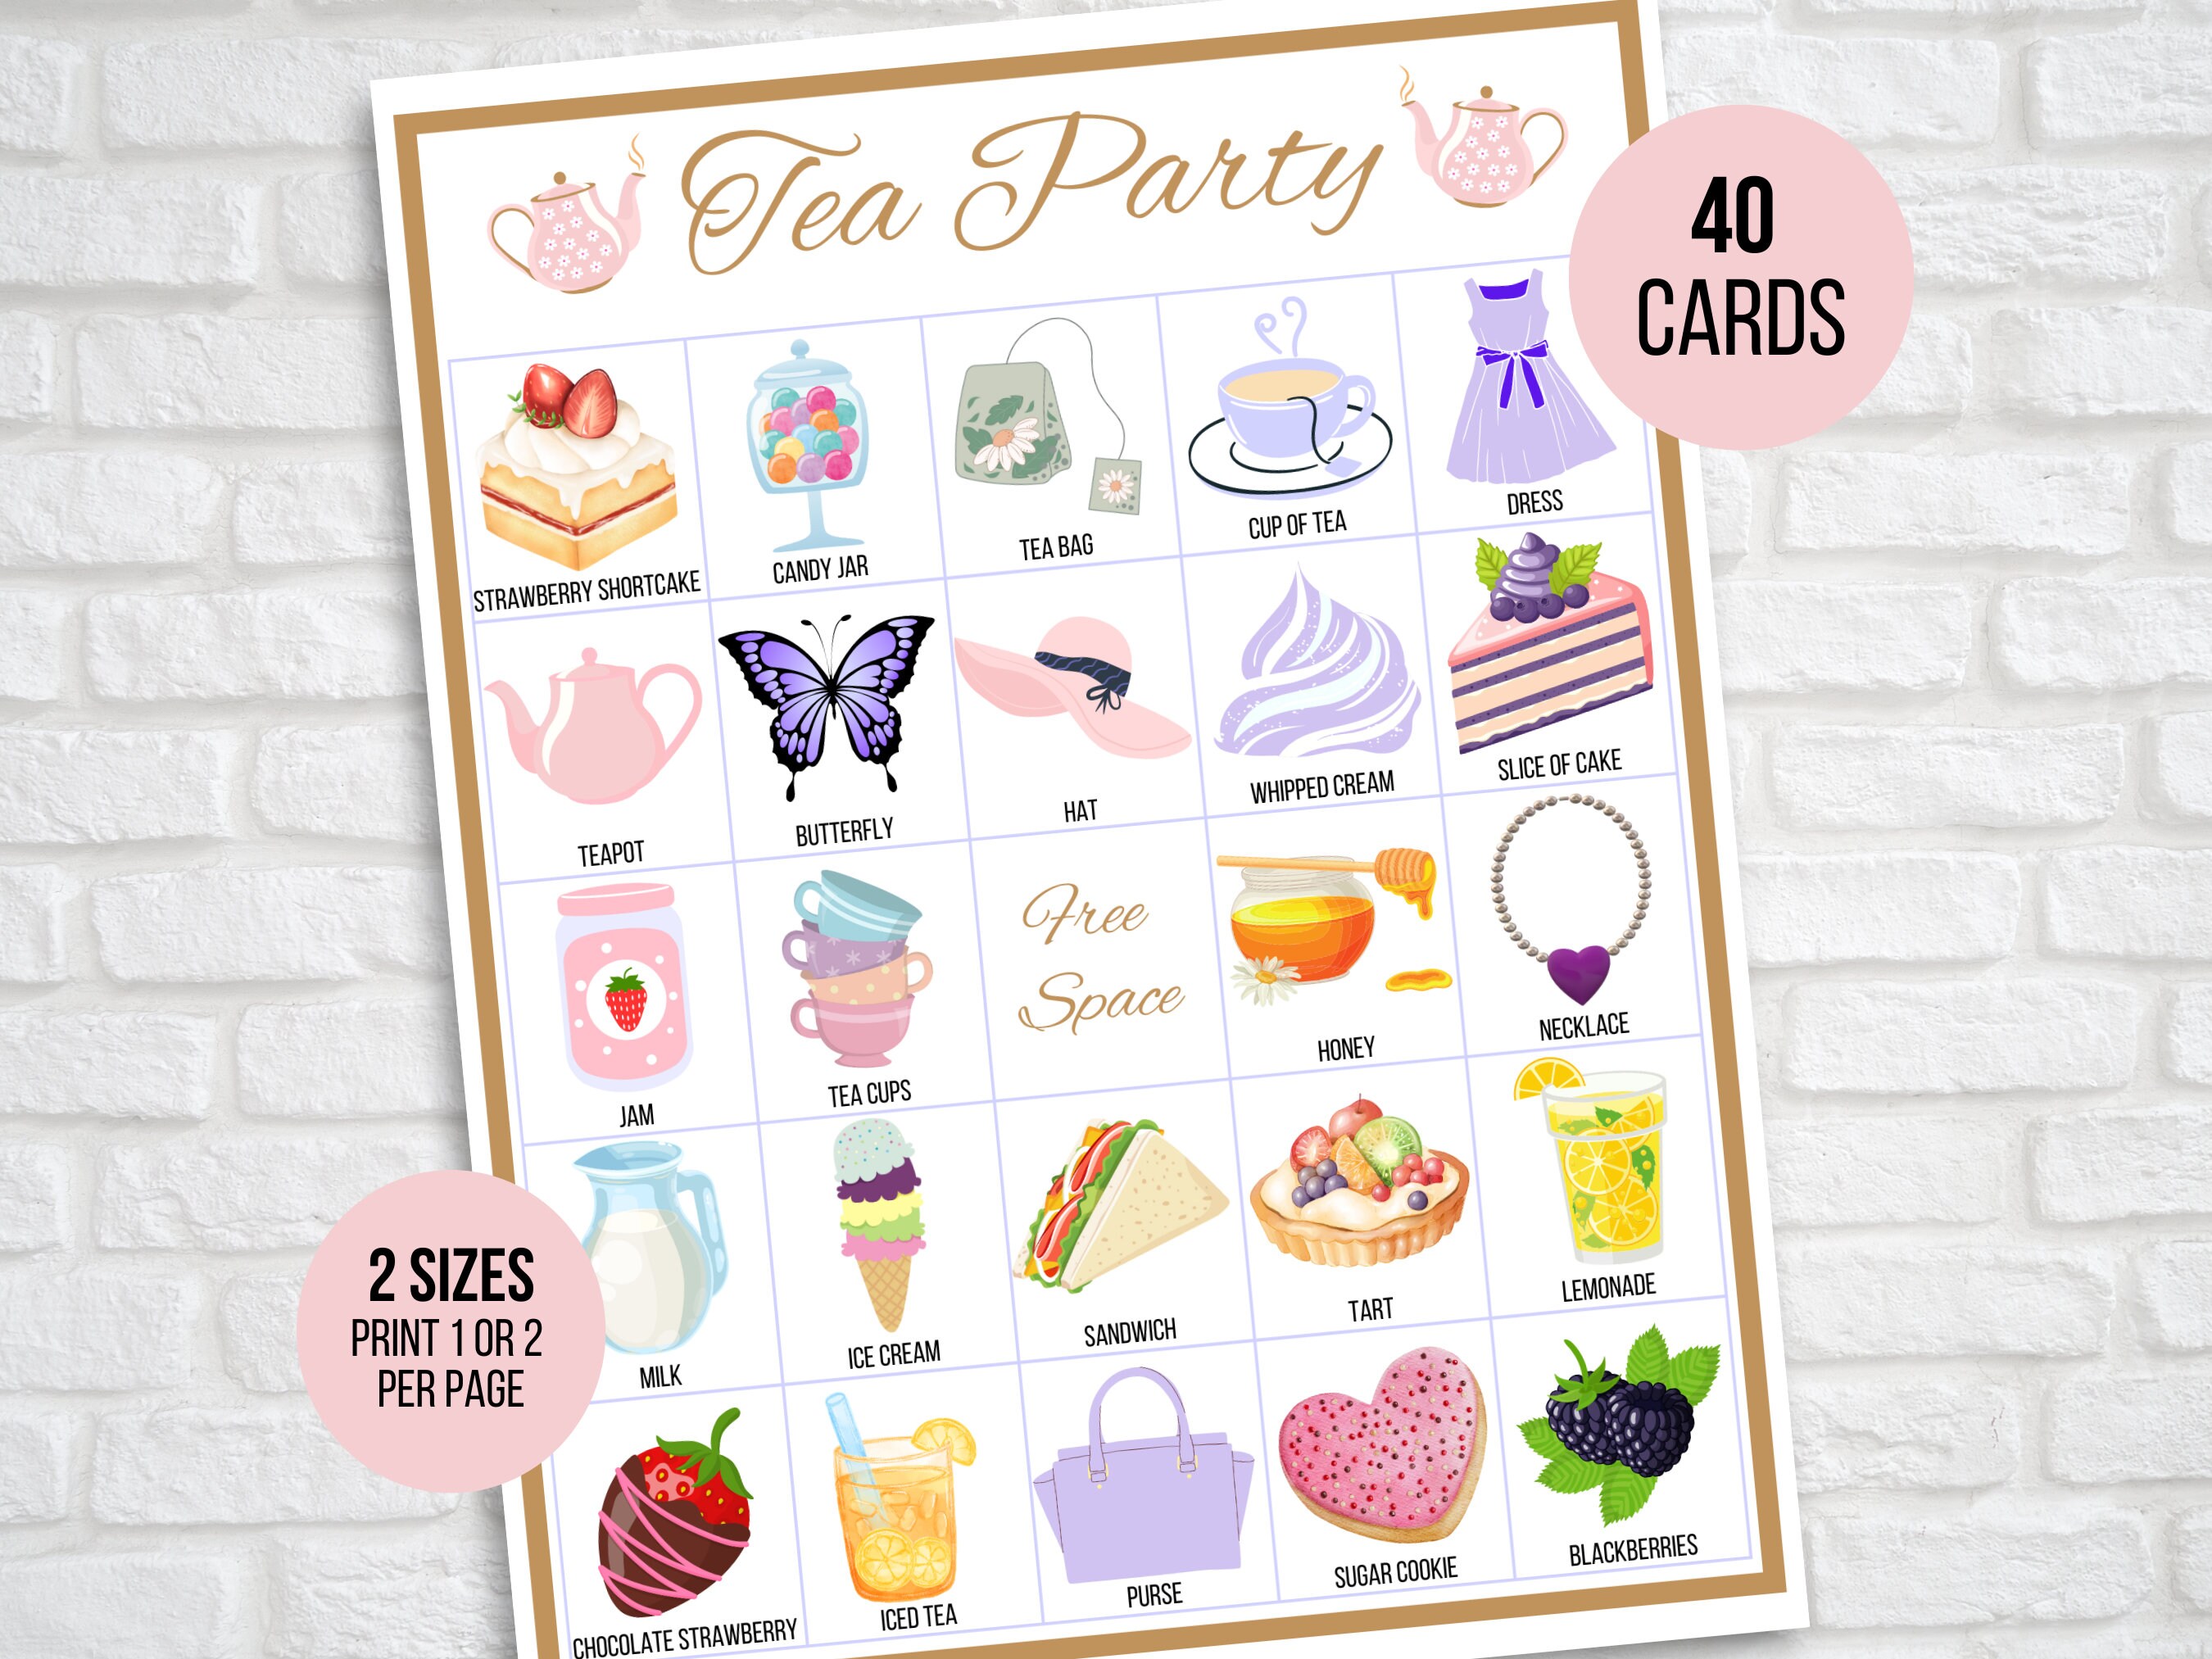  Tea Party Bingo Cards, Let's Par-Tea Game for 24 Players,  Garden Tea Party Games for Family Friends School Classroom Activities,  Holiday Party Favors Supplies Decorations(05) : Toys & Games